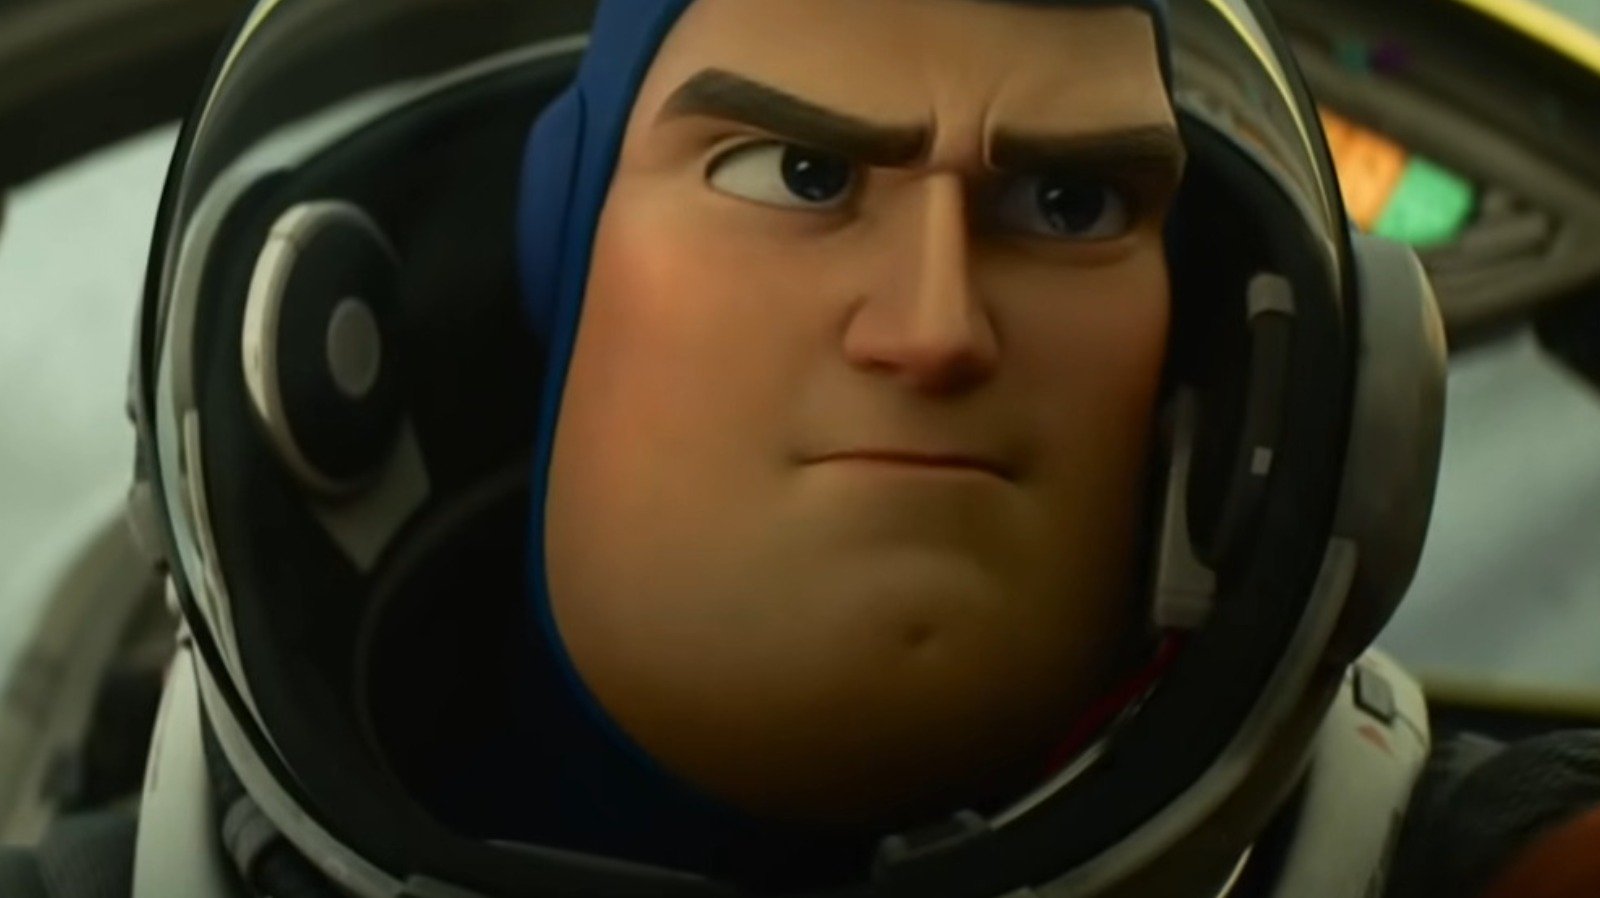 The Toy Story Quotes You Might Have Missed In Pixar's Lightyear